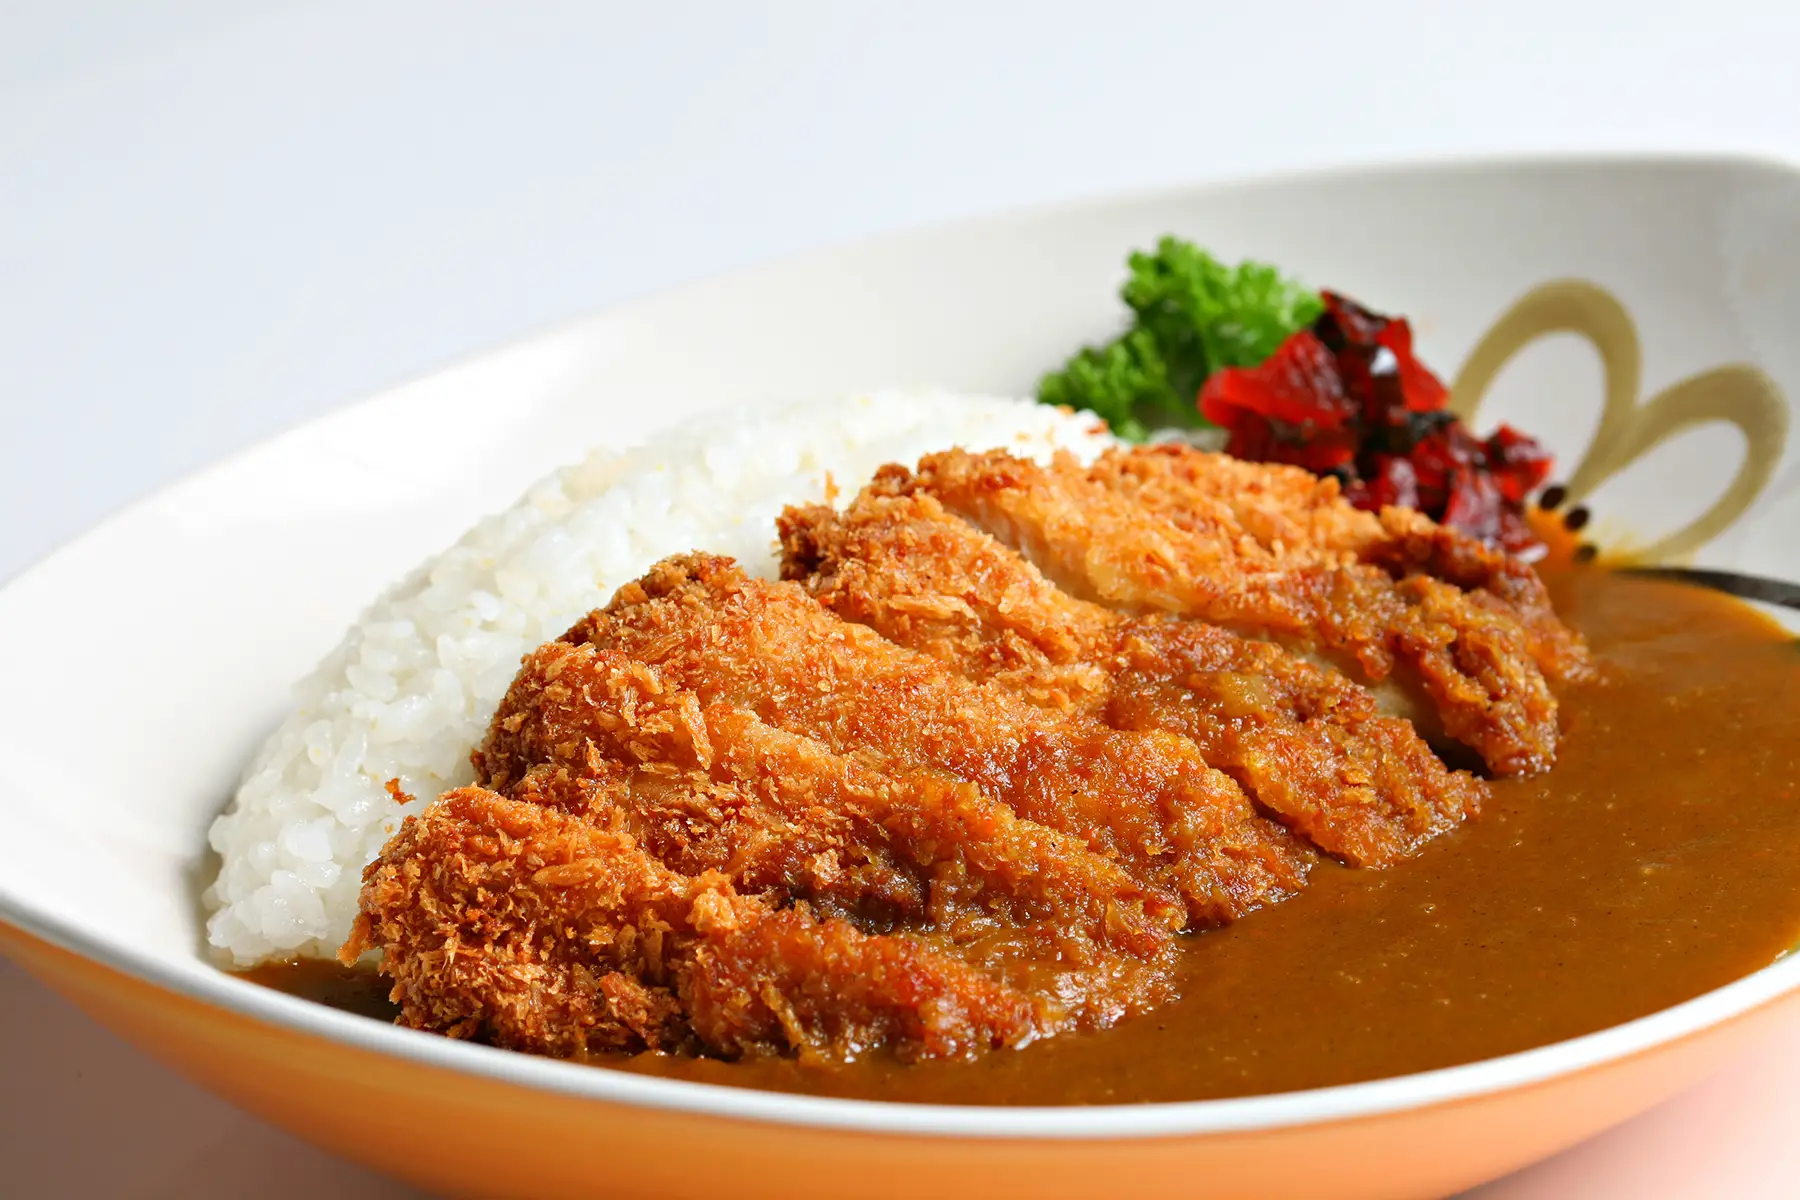 Katsu curry: breaded meat with curry sauce and rice